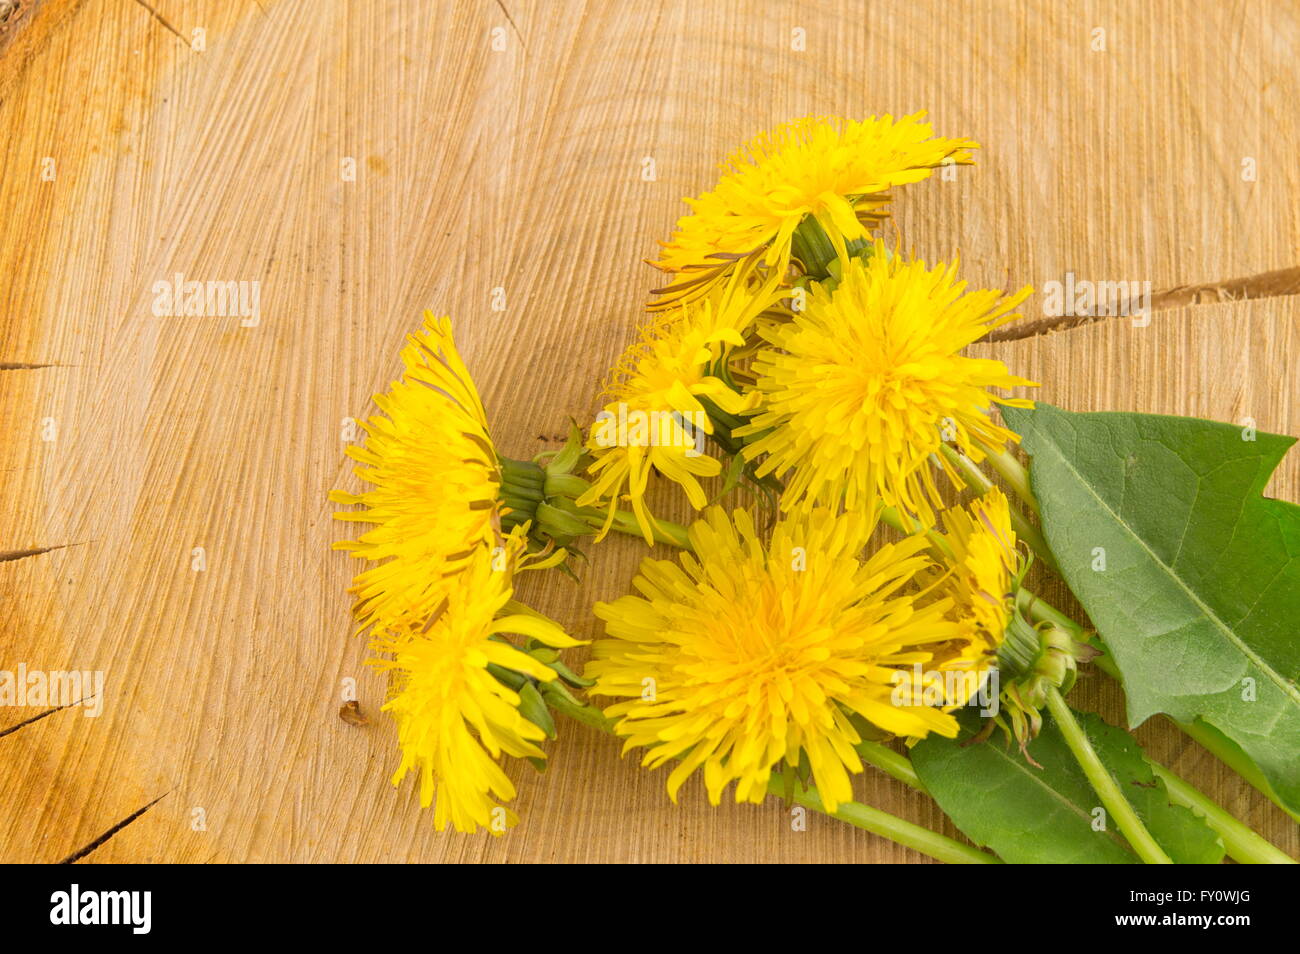 Yellow dandelions on a wooden background Stock Photo